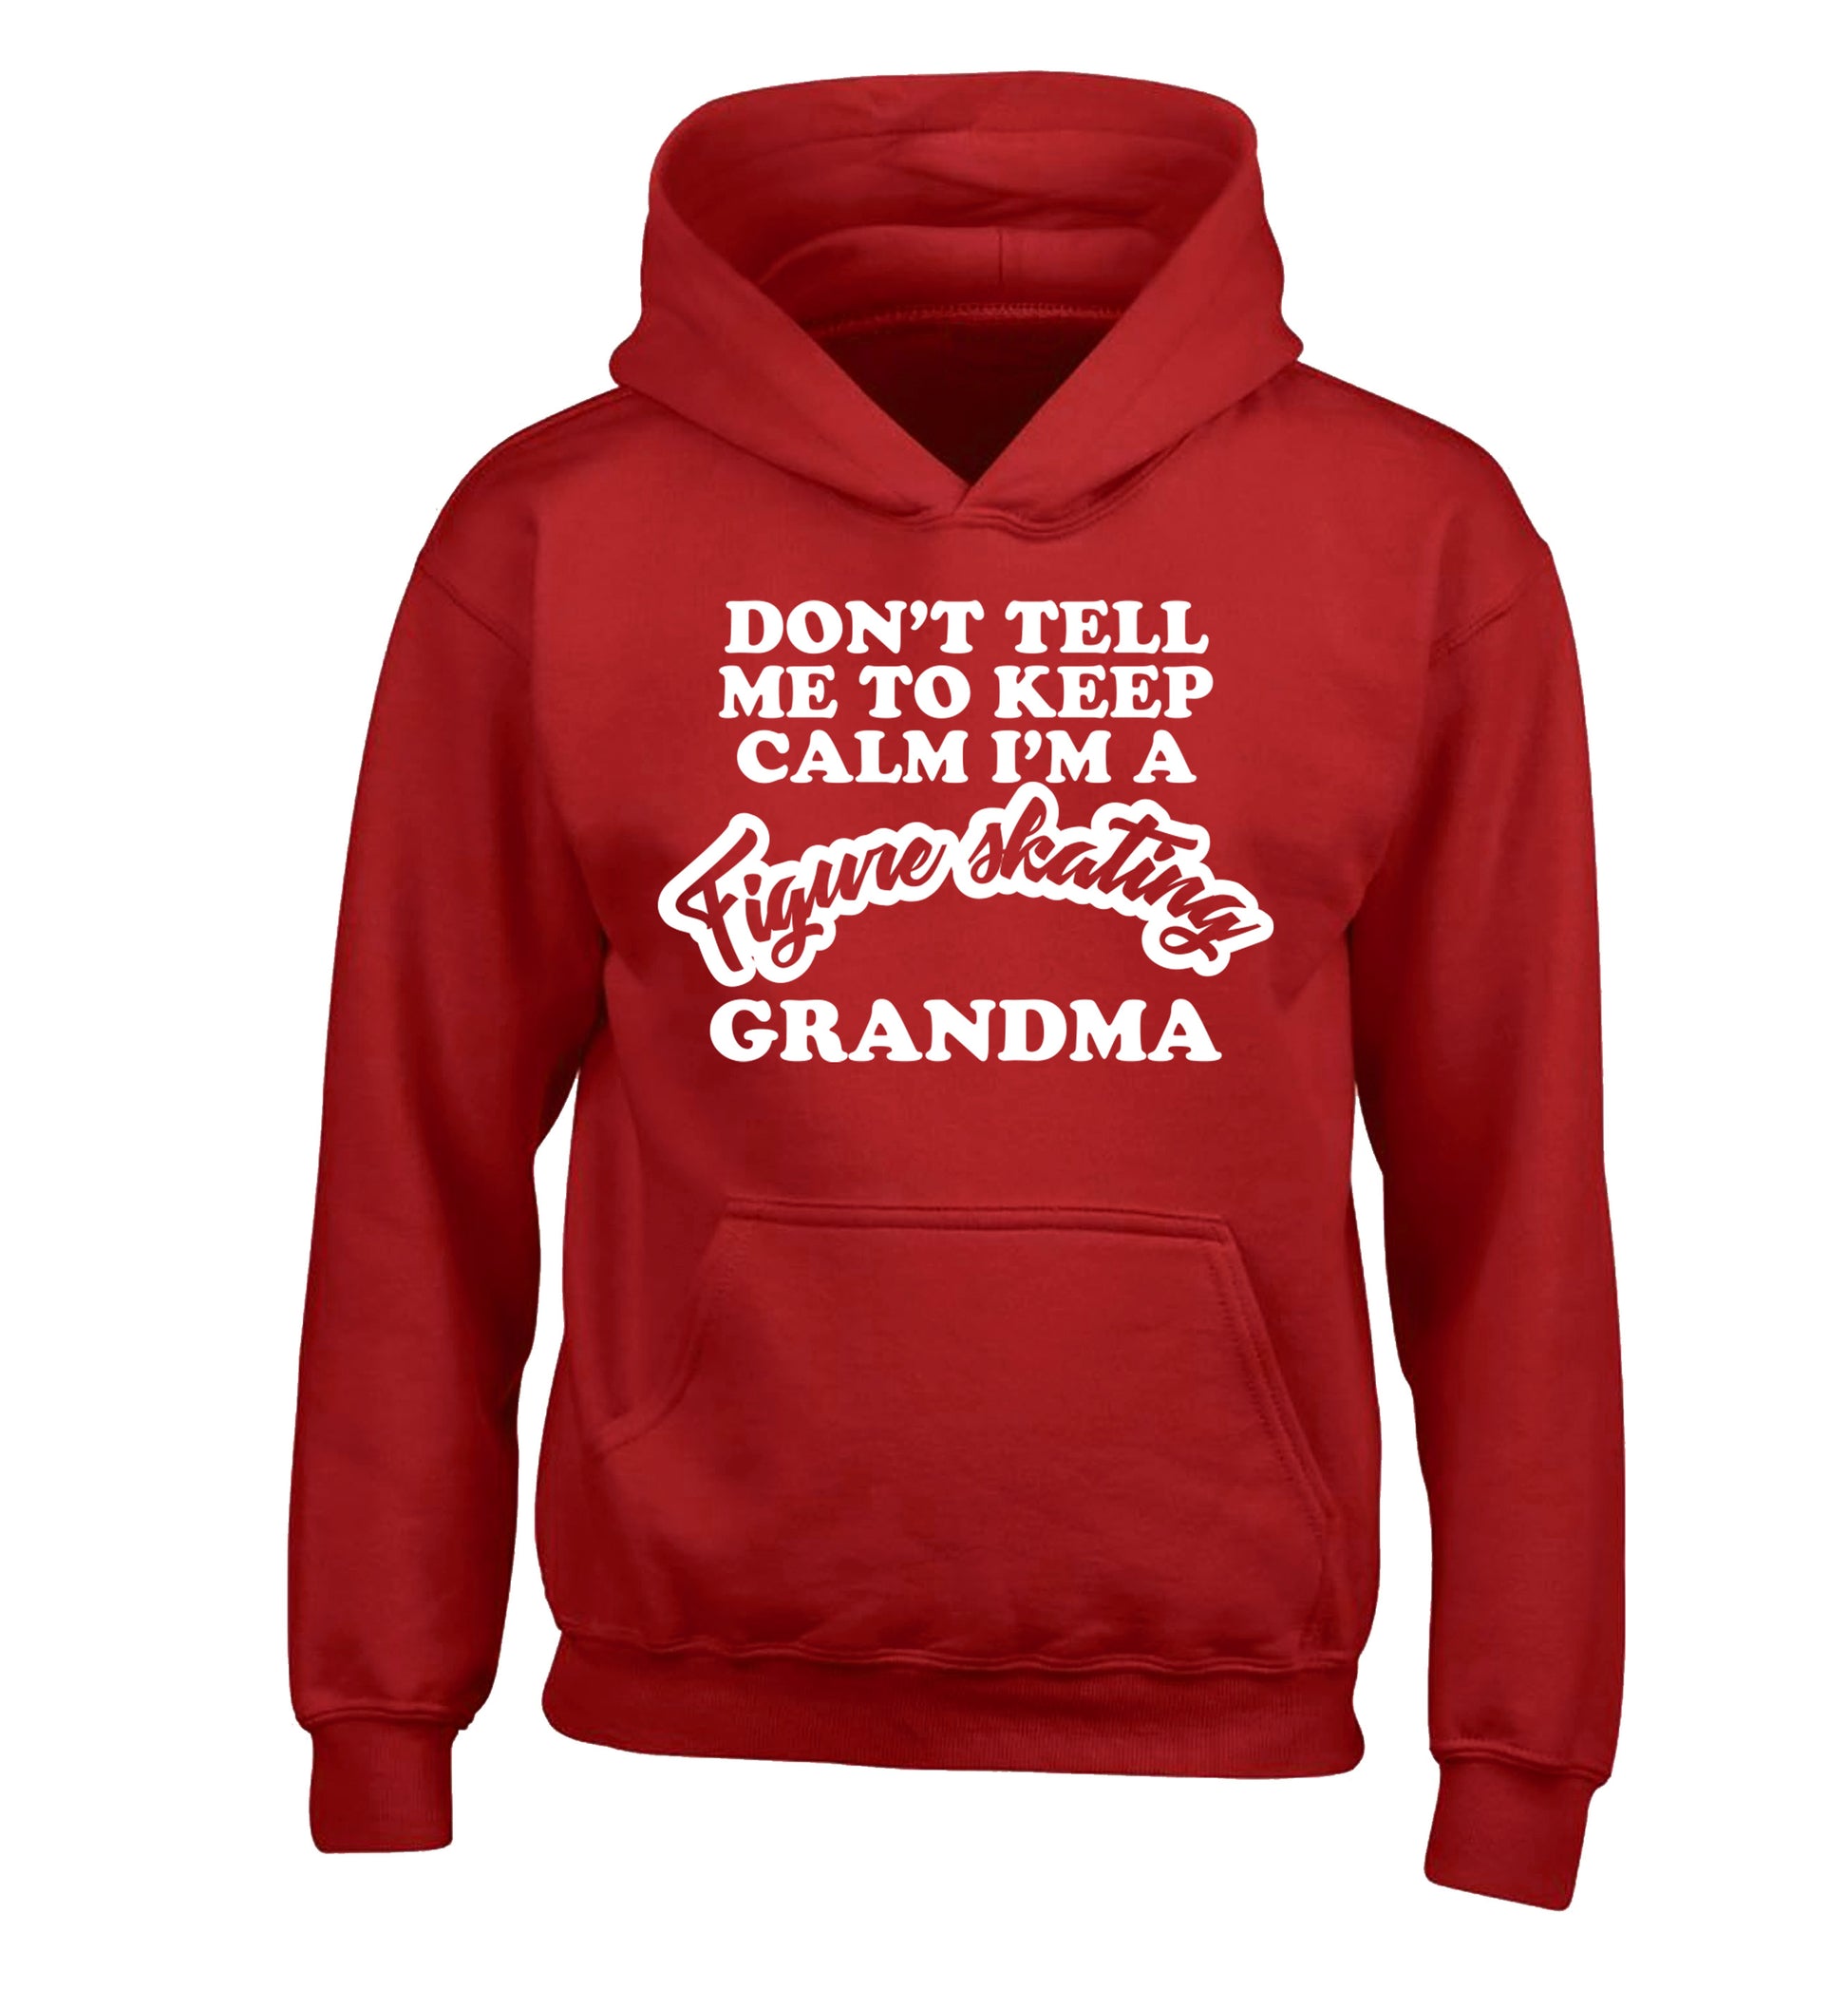 Don't tell me to keep calm I'm a figure skating grandma children's red hoodie 12-14 Years